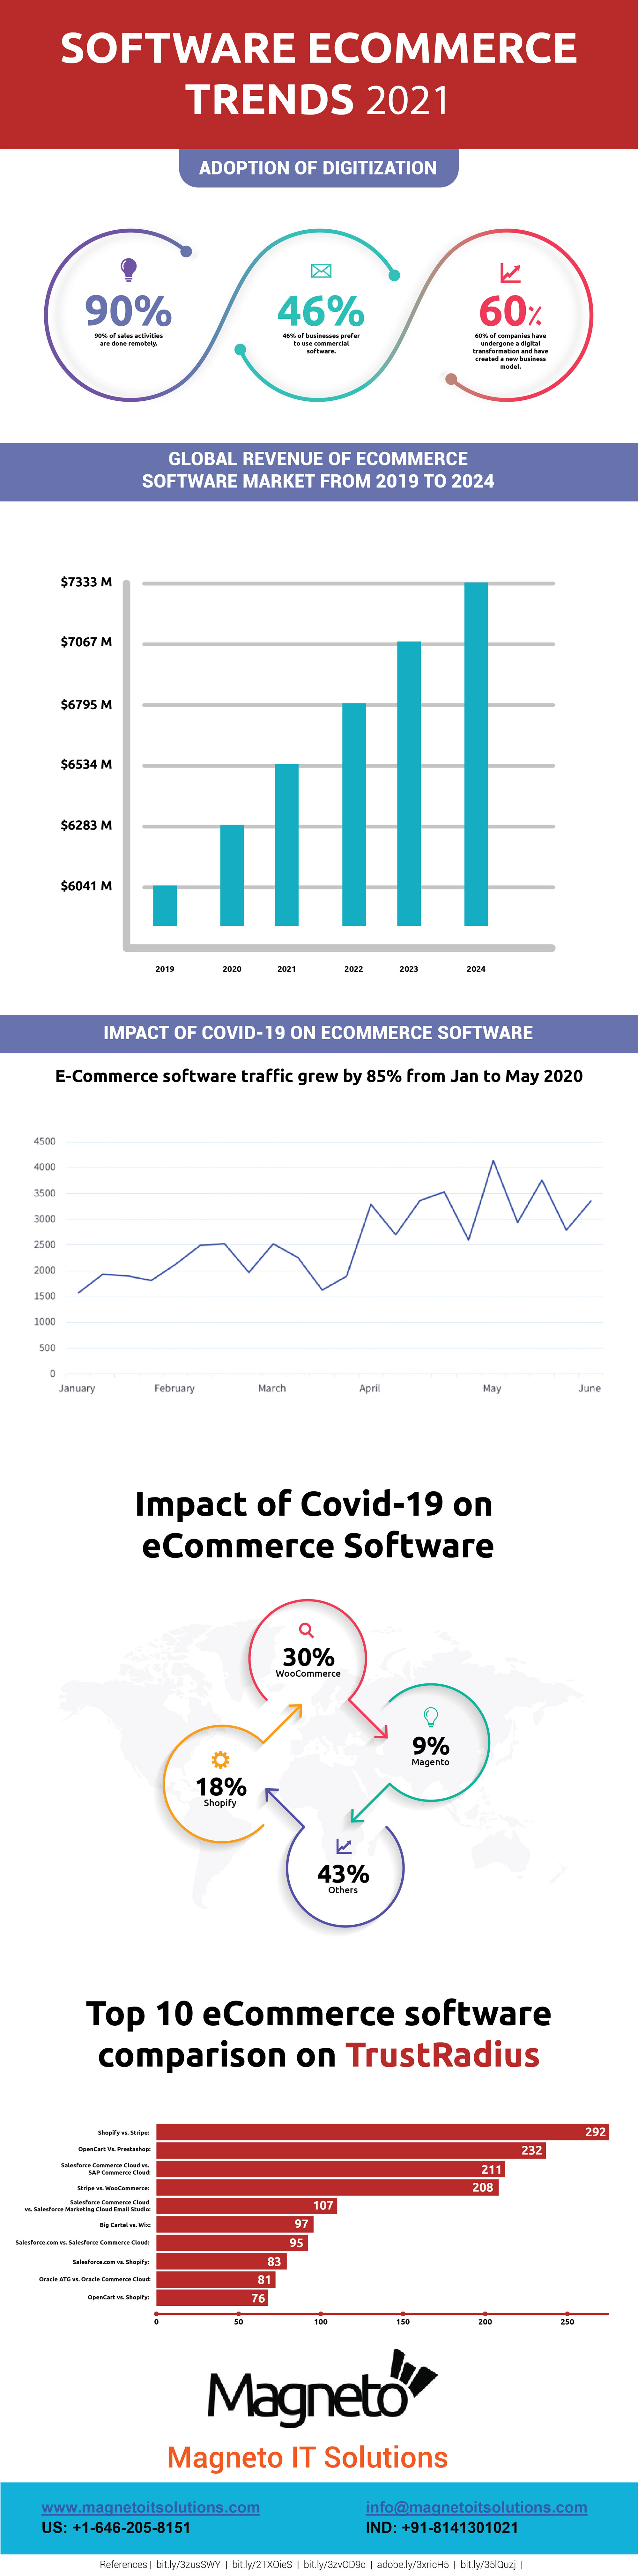 Software eCommerce Trends Infographic